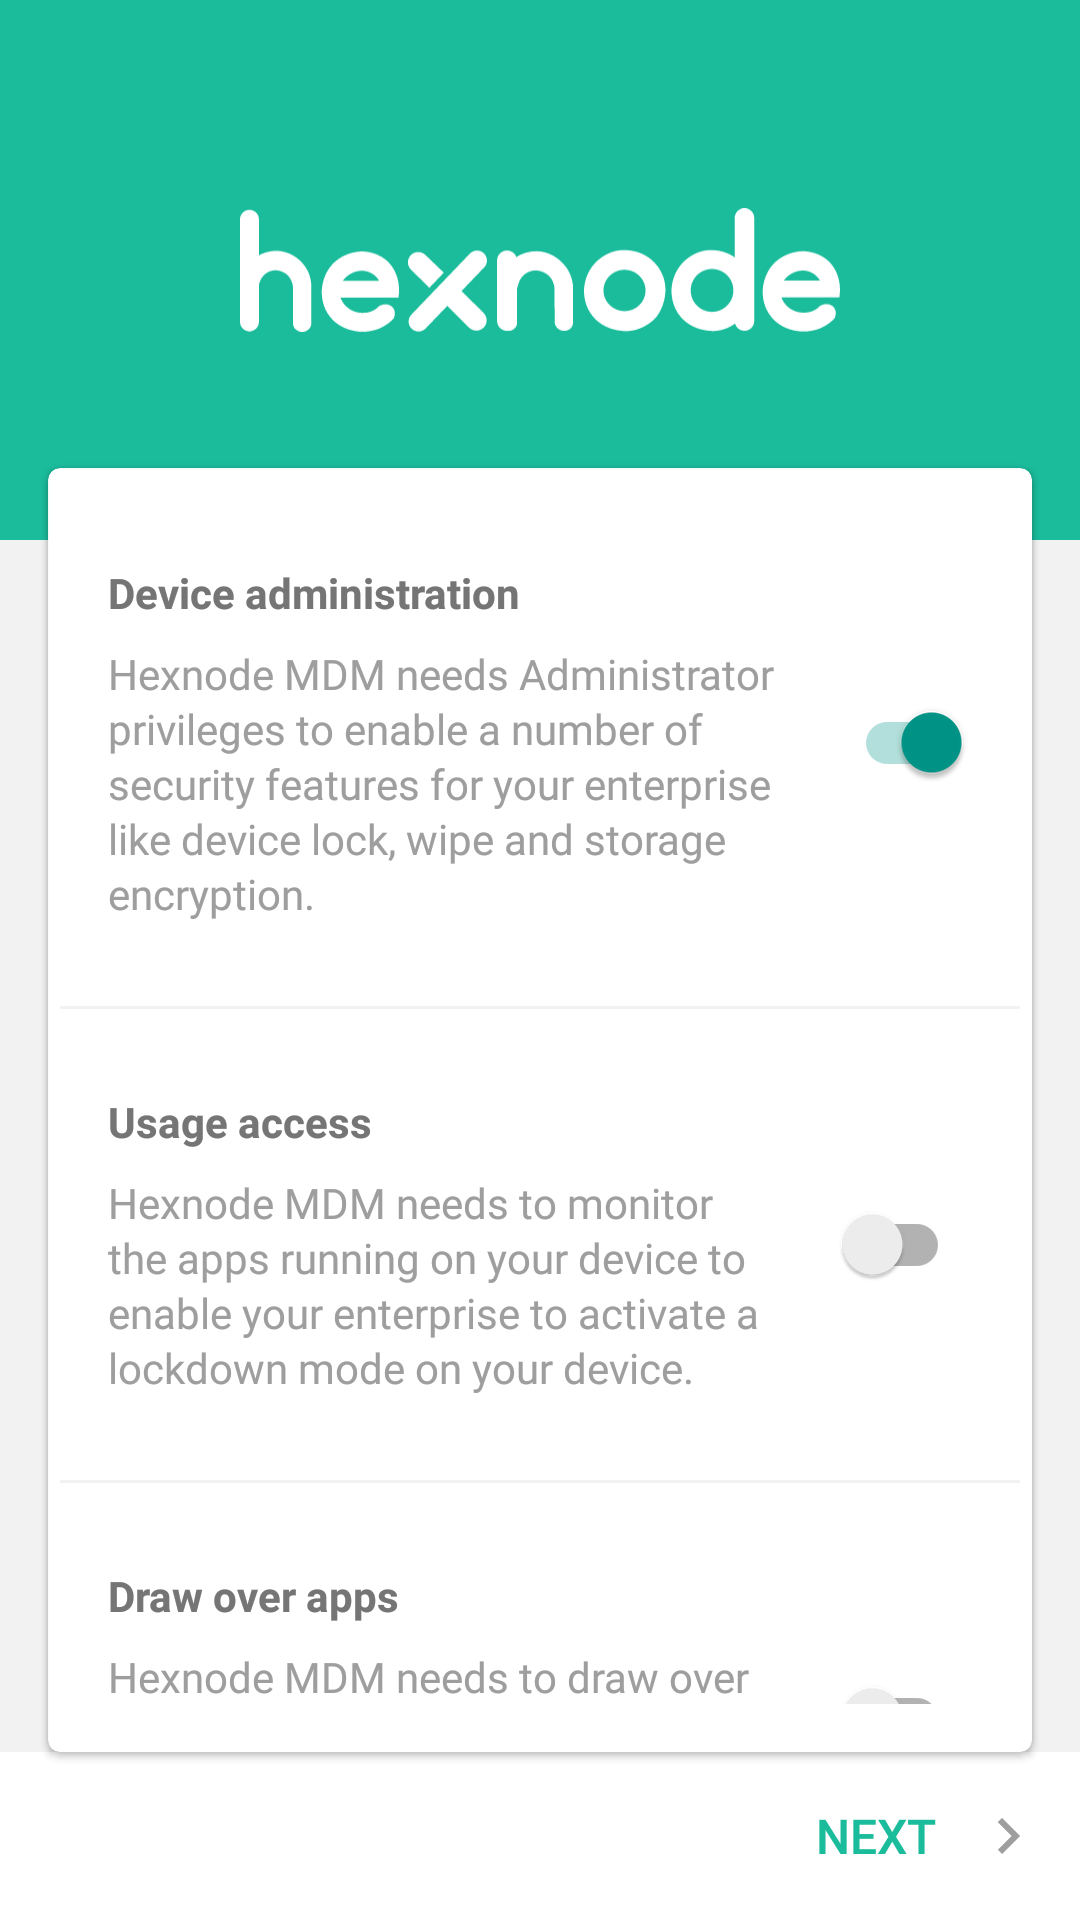 Grant the required permissions for the app